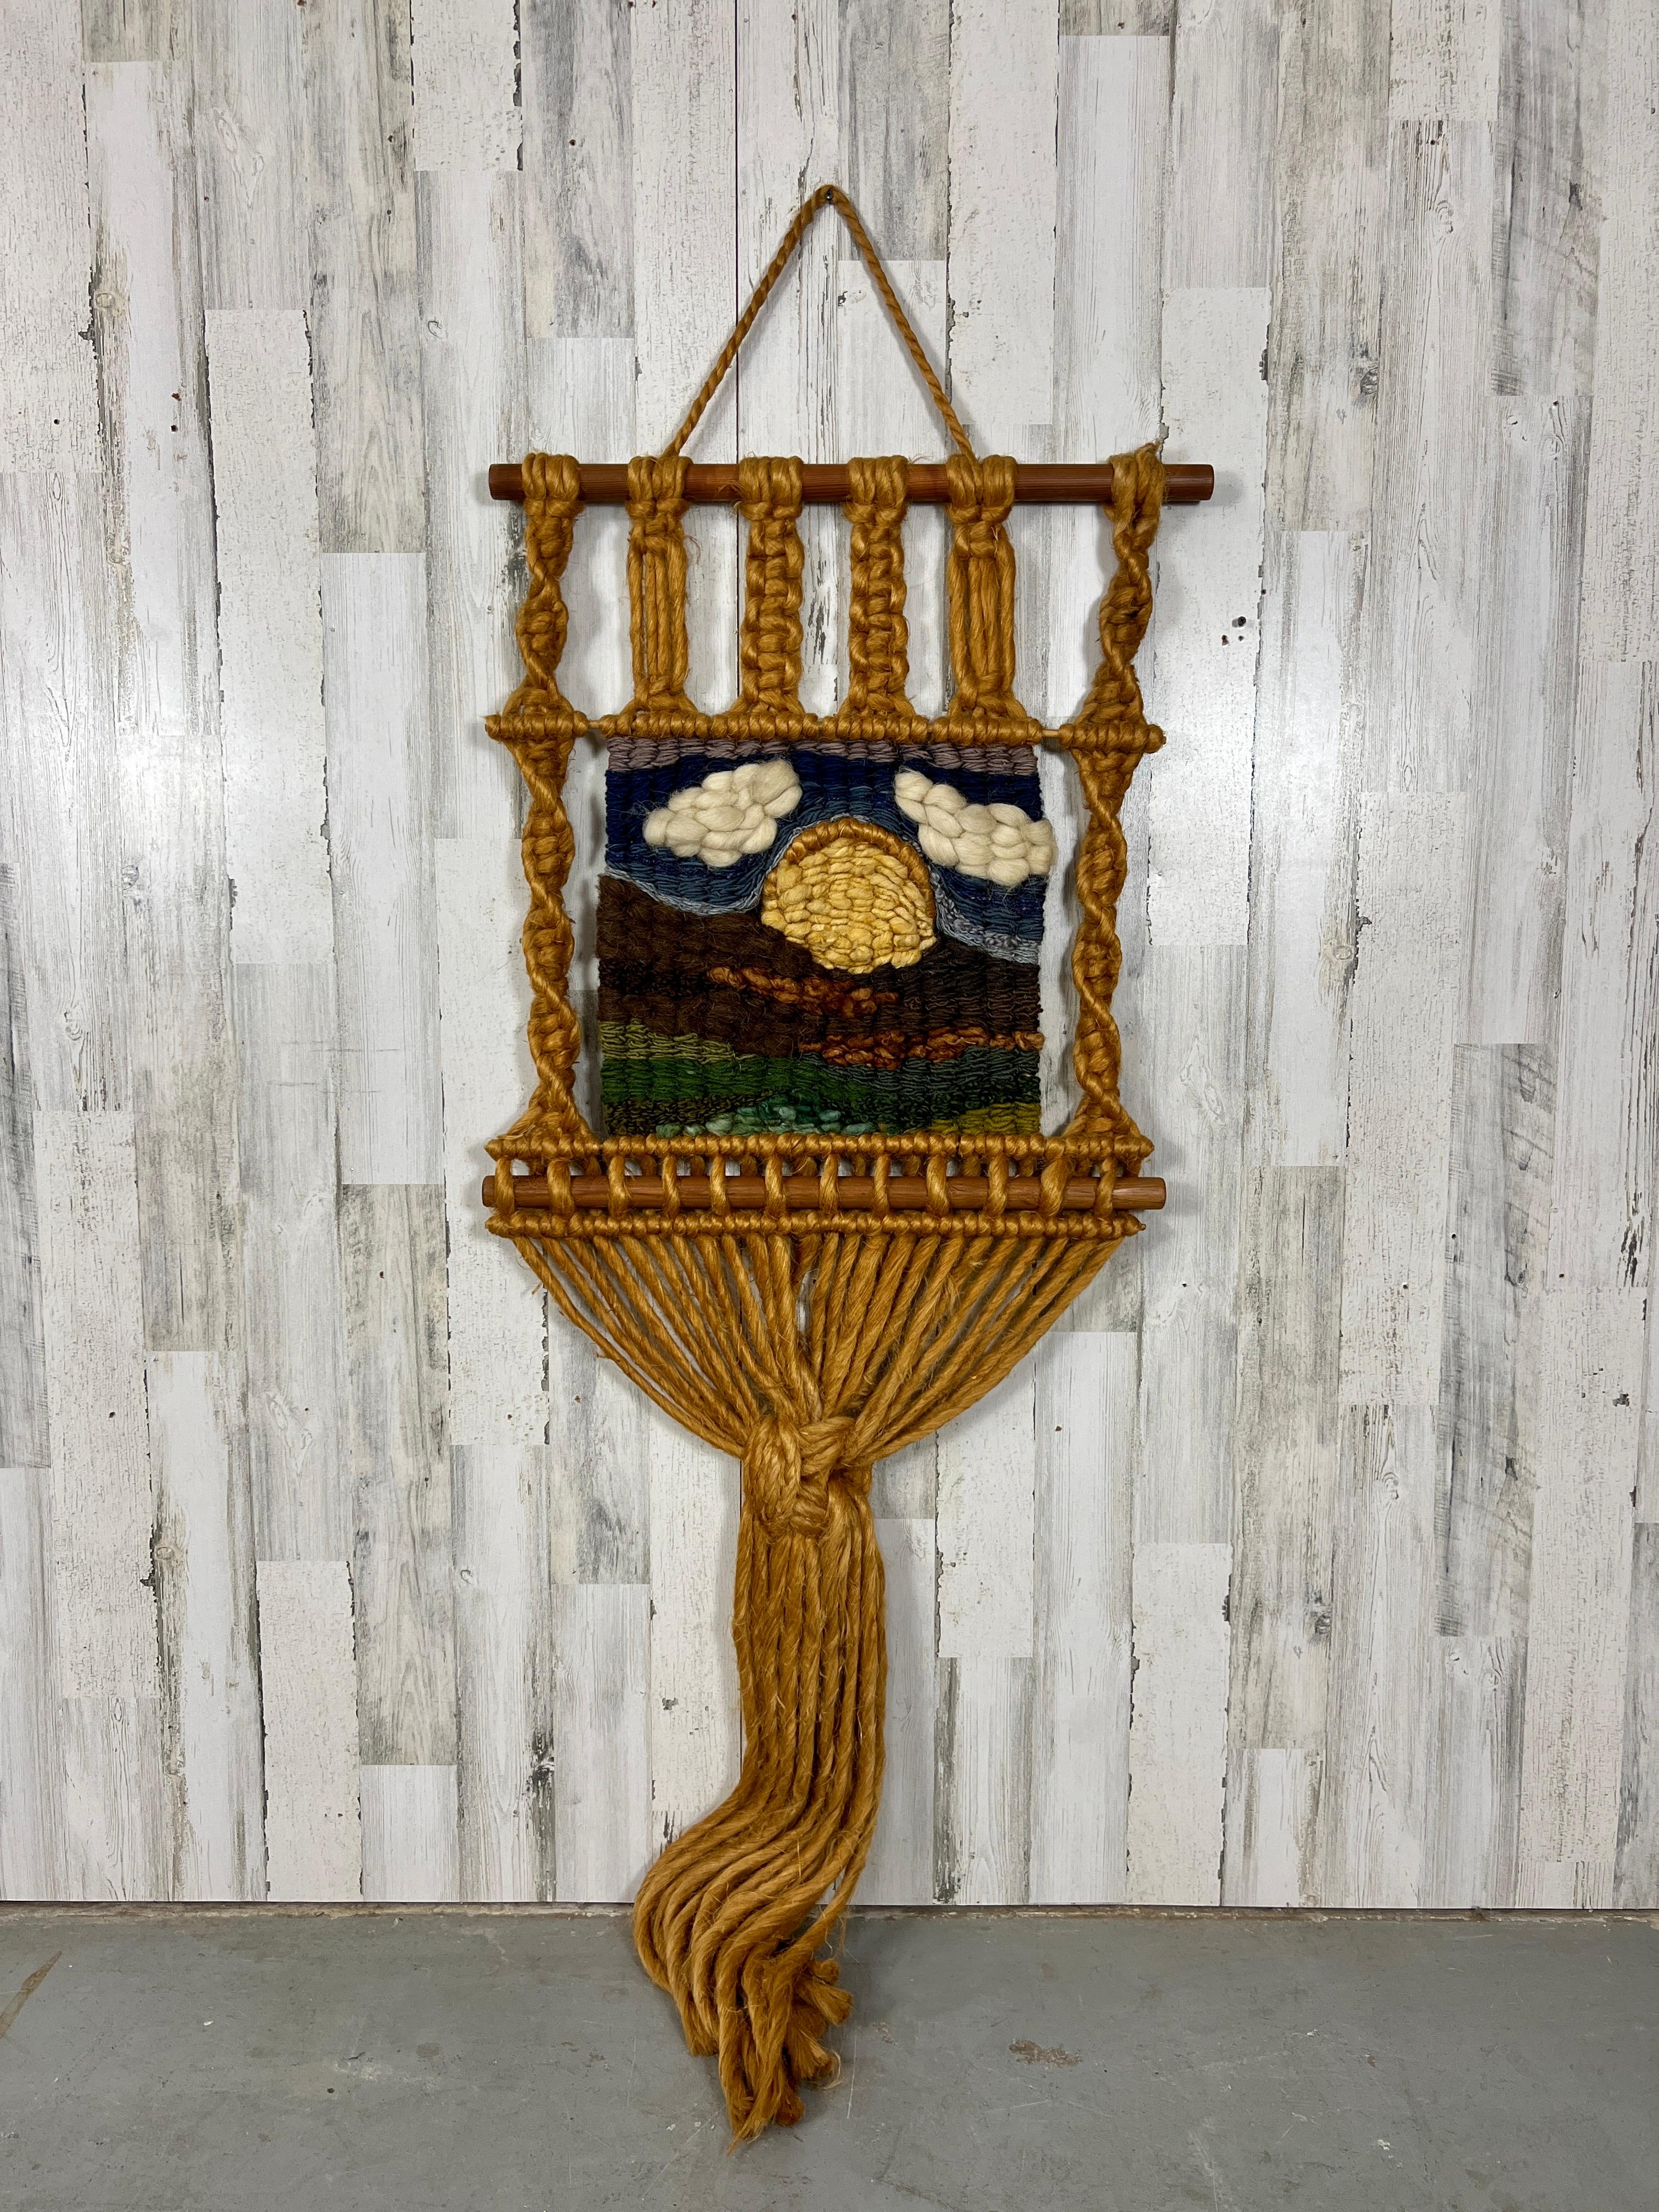 Large Macrame handcrafted with many different knot styles and a scene of hills, sun and clouds.